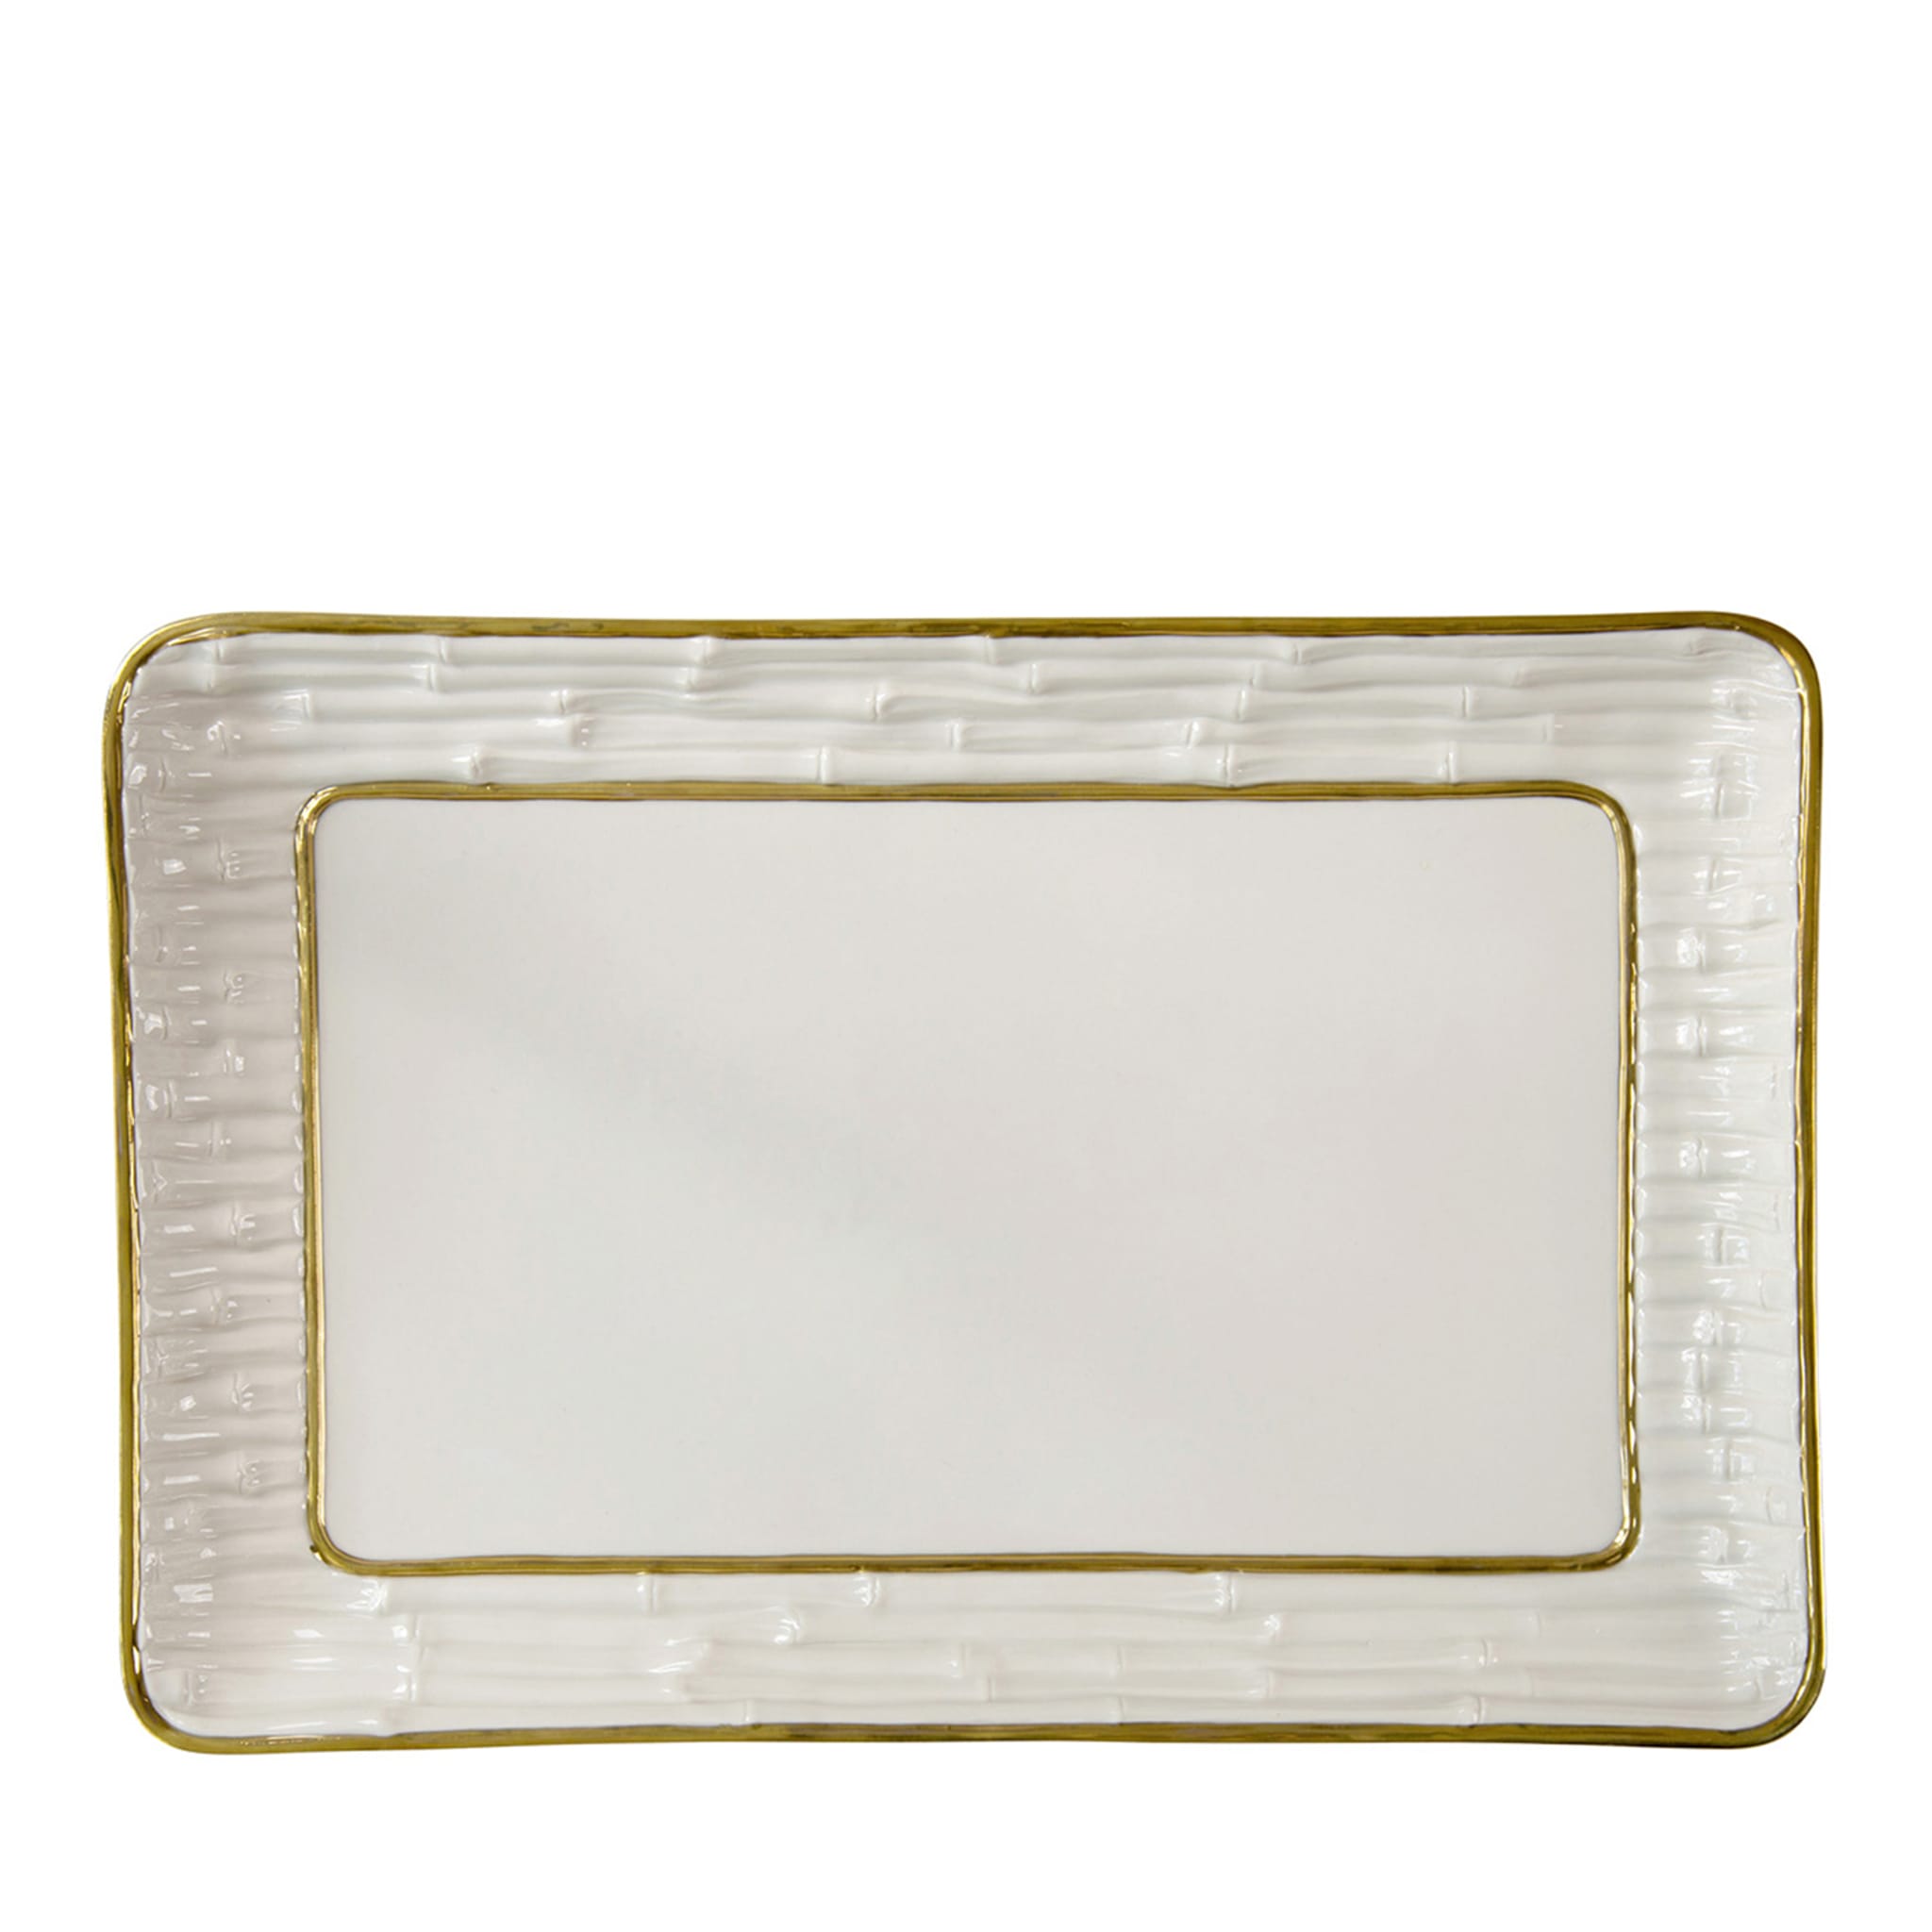 BAMBOO TRAY - WHITE AND GOLD - Main view